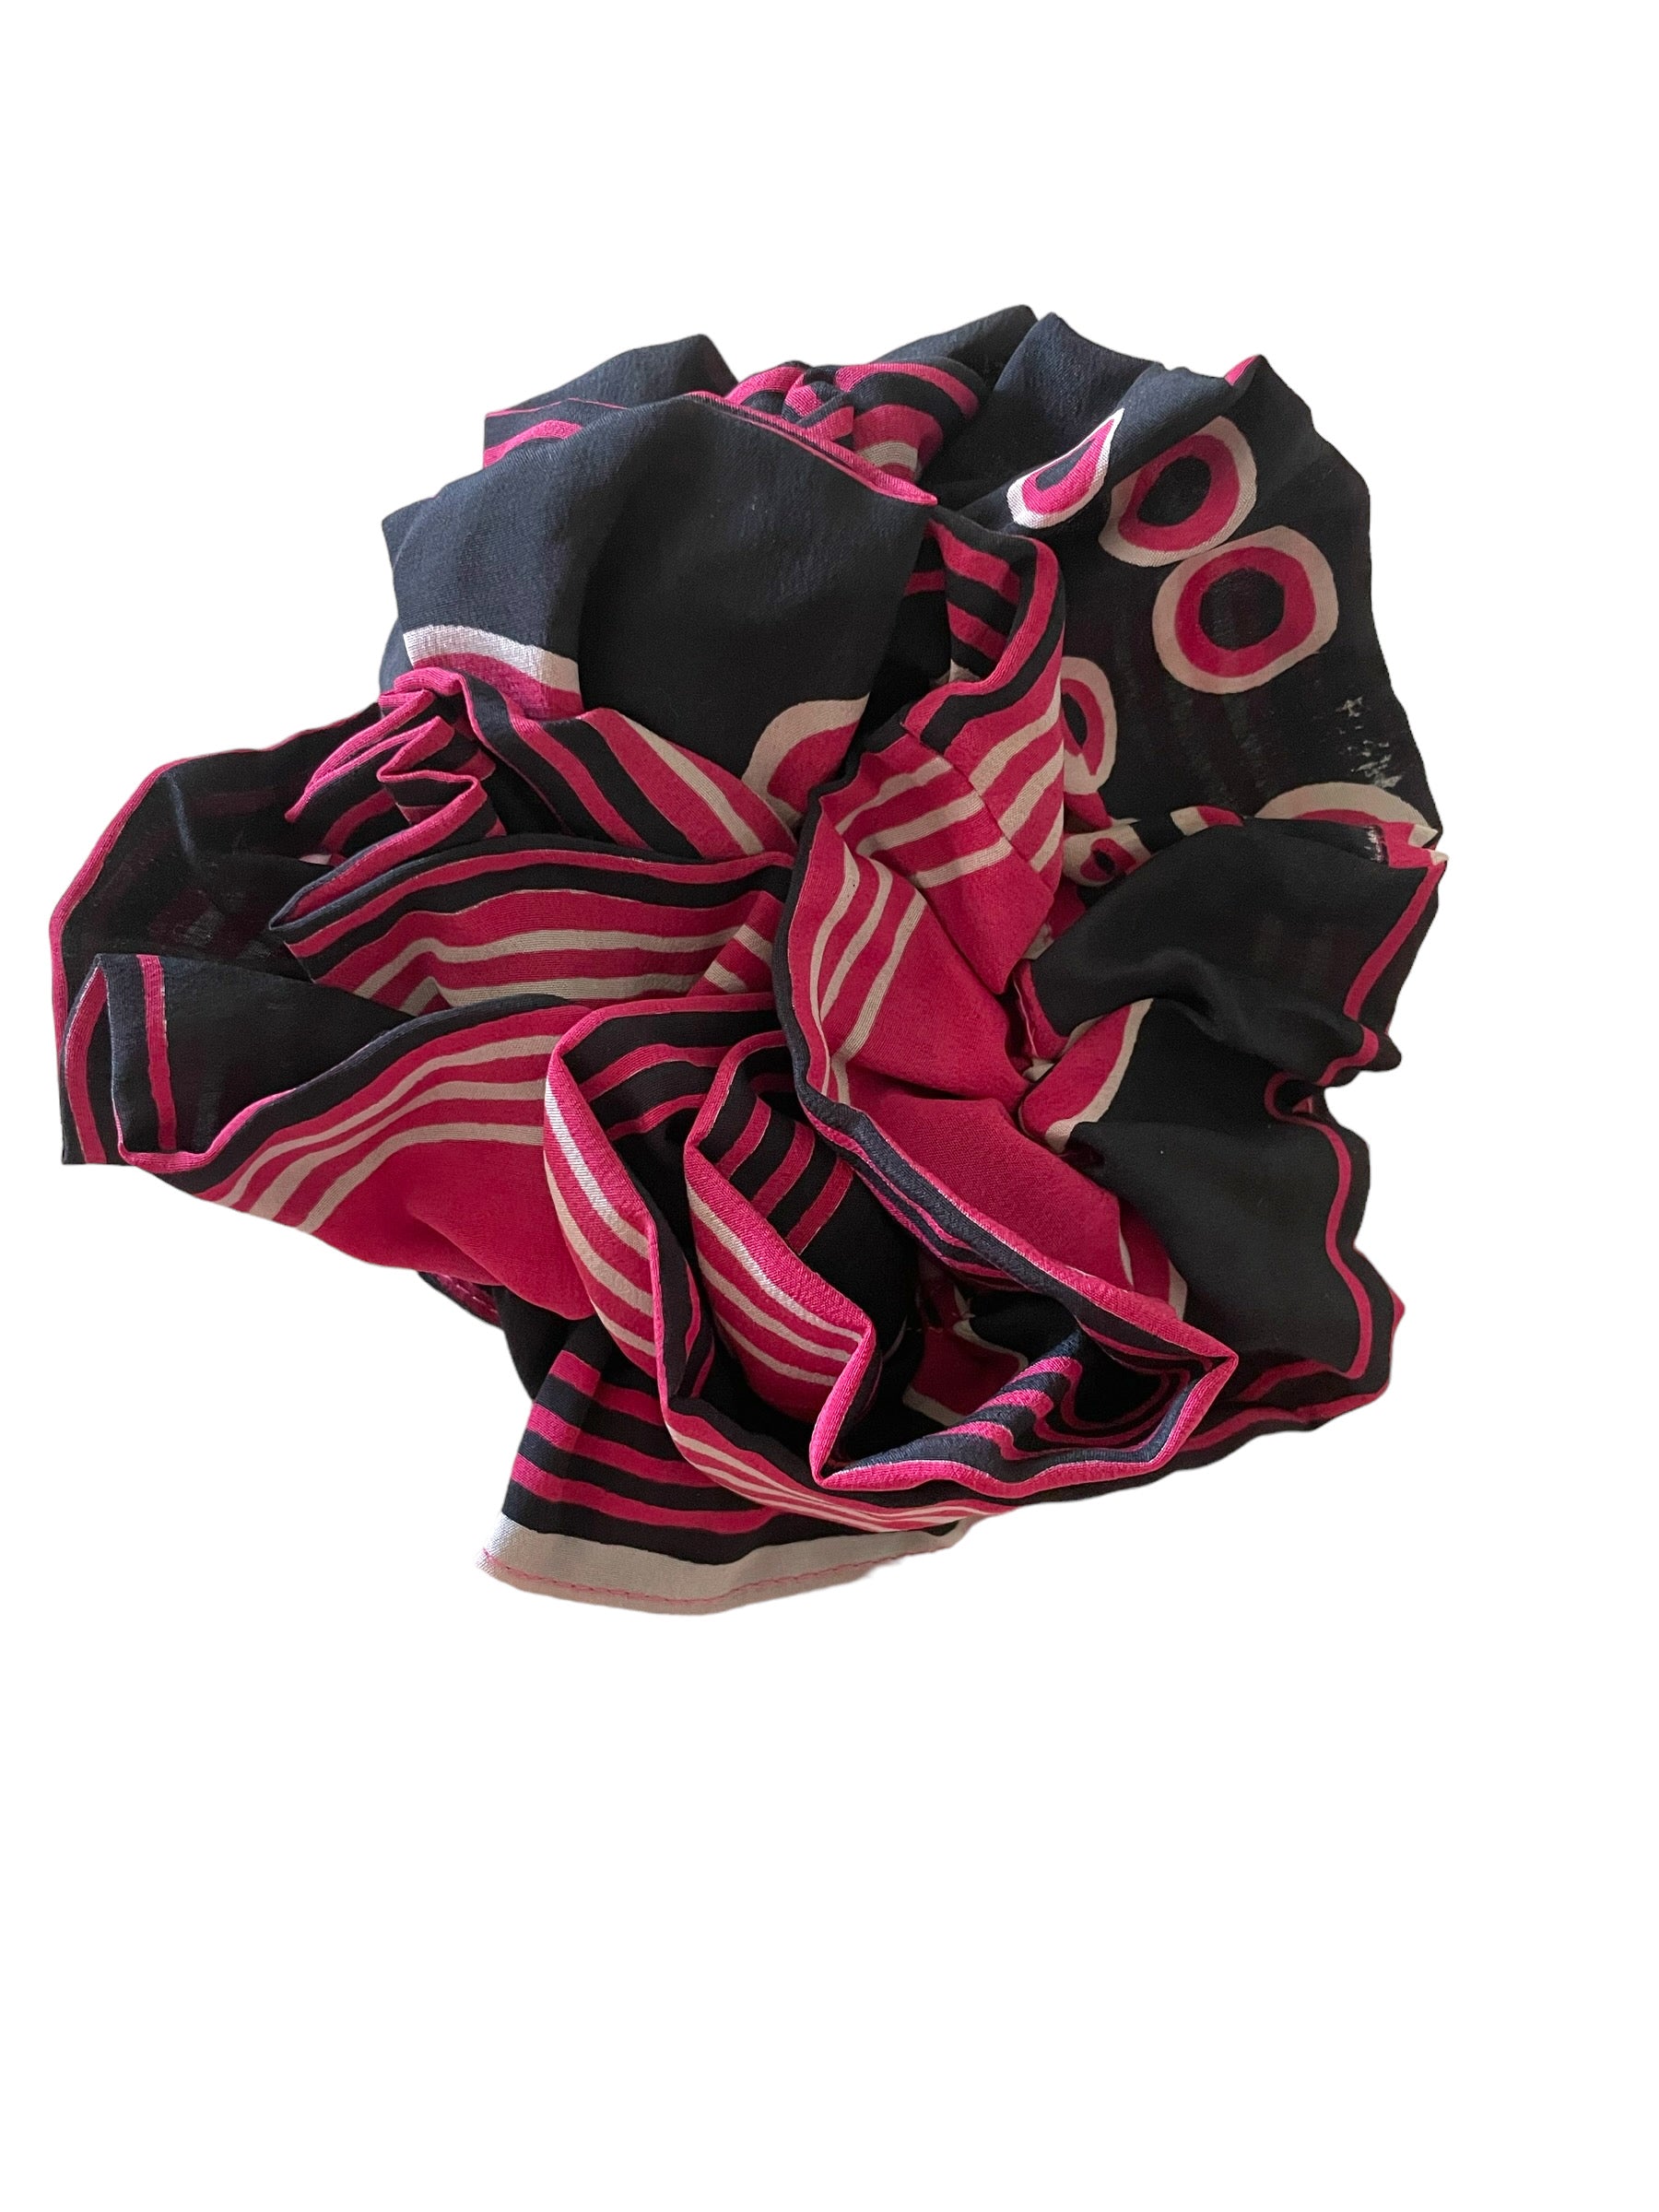 Silk Double Scrunchies - Pack of 2 Assorted Colors